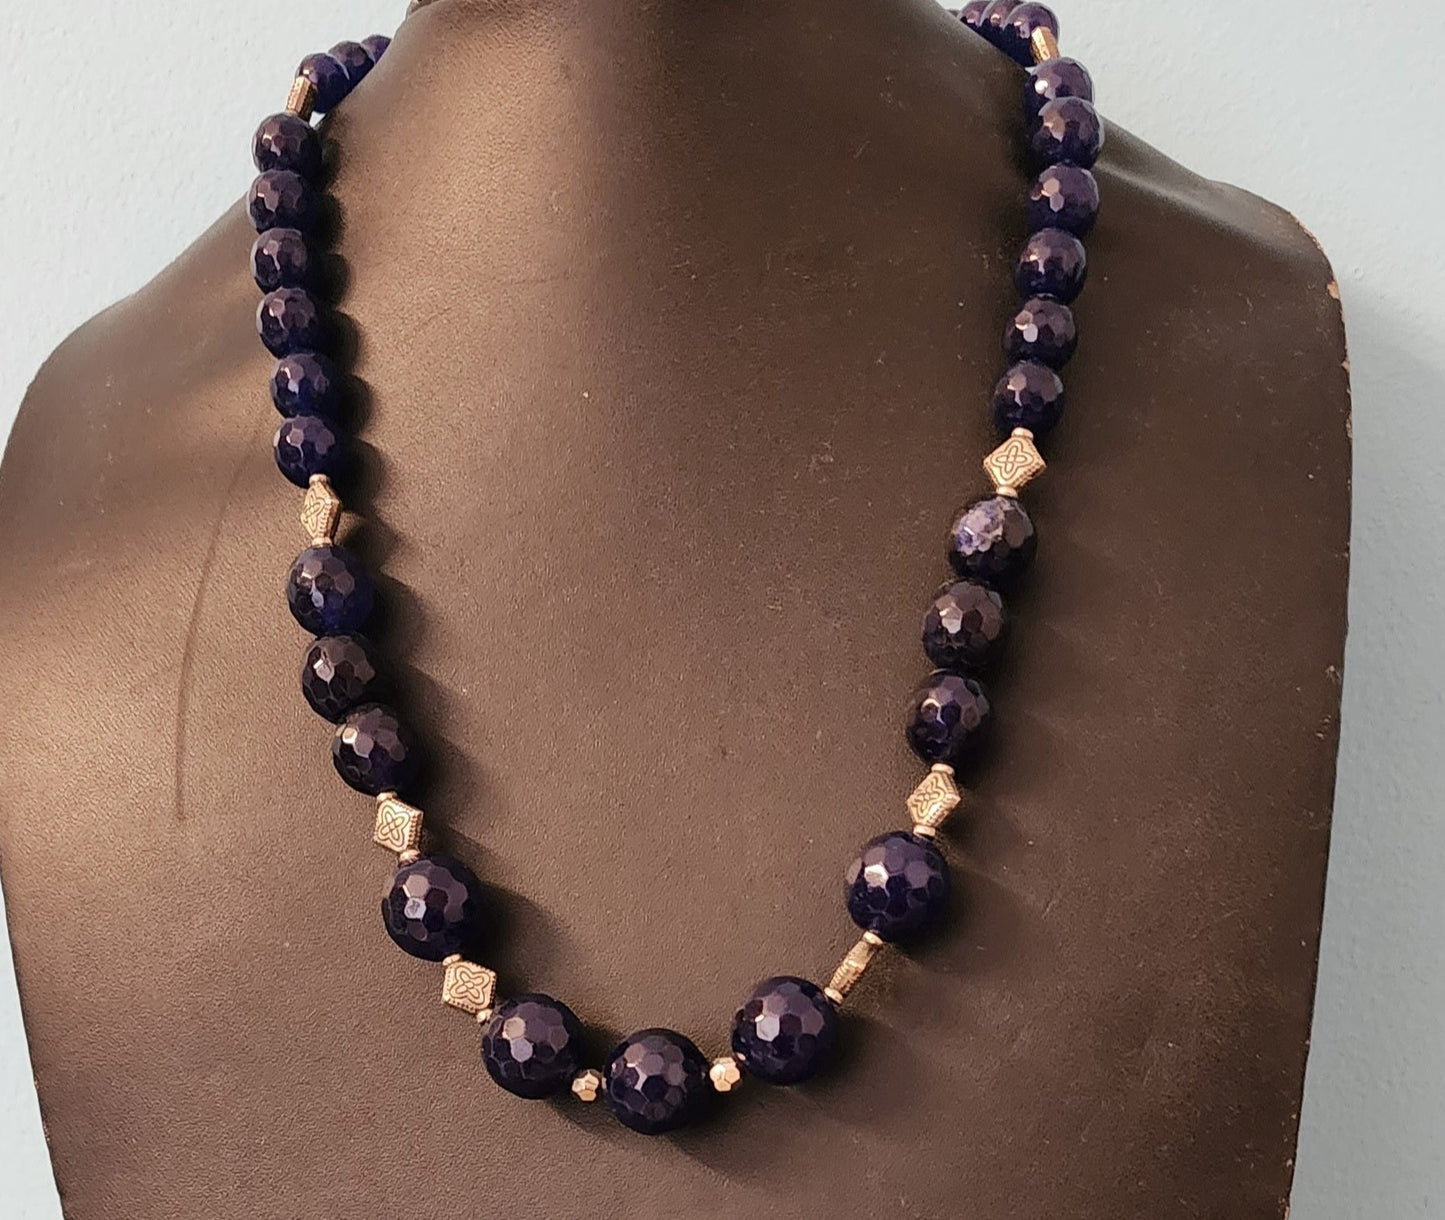 Twilight Charm : Natural Graduated Agate Necklace